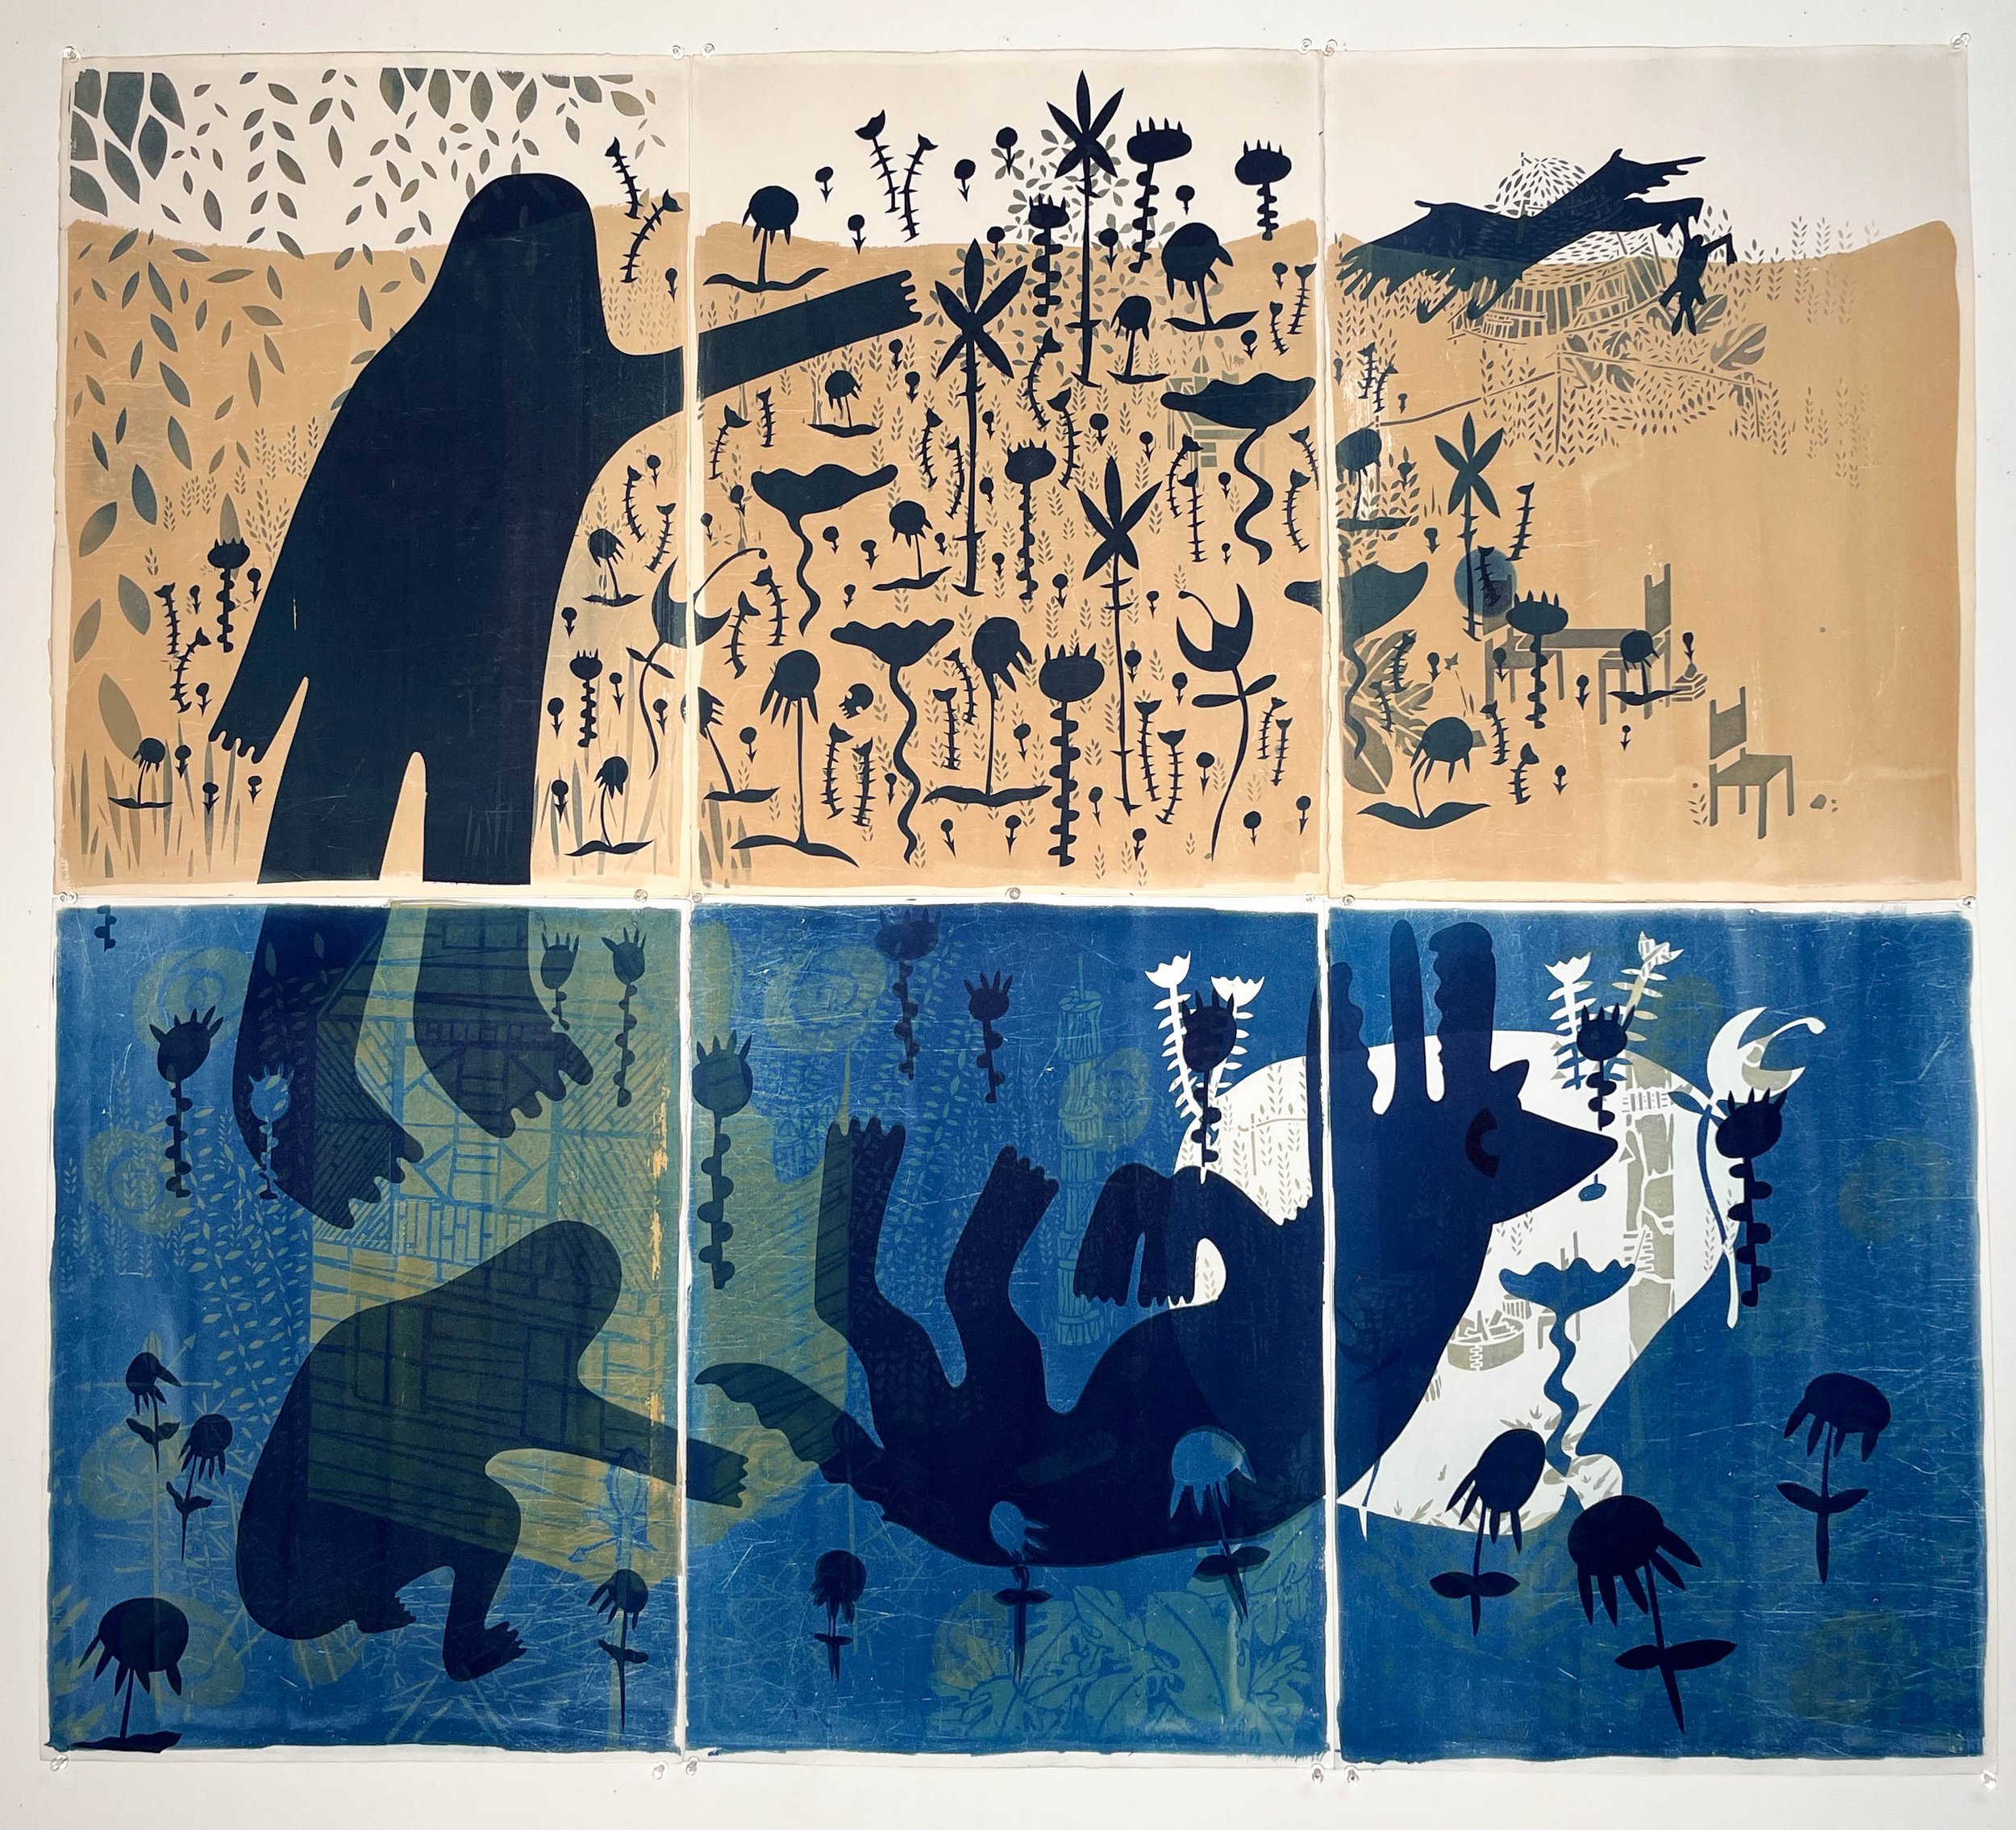 THE ECSTASIES OF LIFE AND DEATH | 54 x 48 inches (6 - 18 x 24 inches panel each) / 137.2 x 121.9, toned cyanotype on selectively dyed Rives BFK, Edition 1/1, 2022